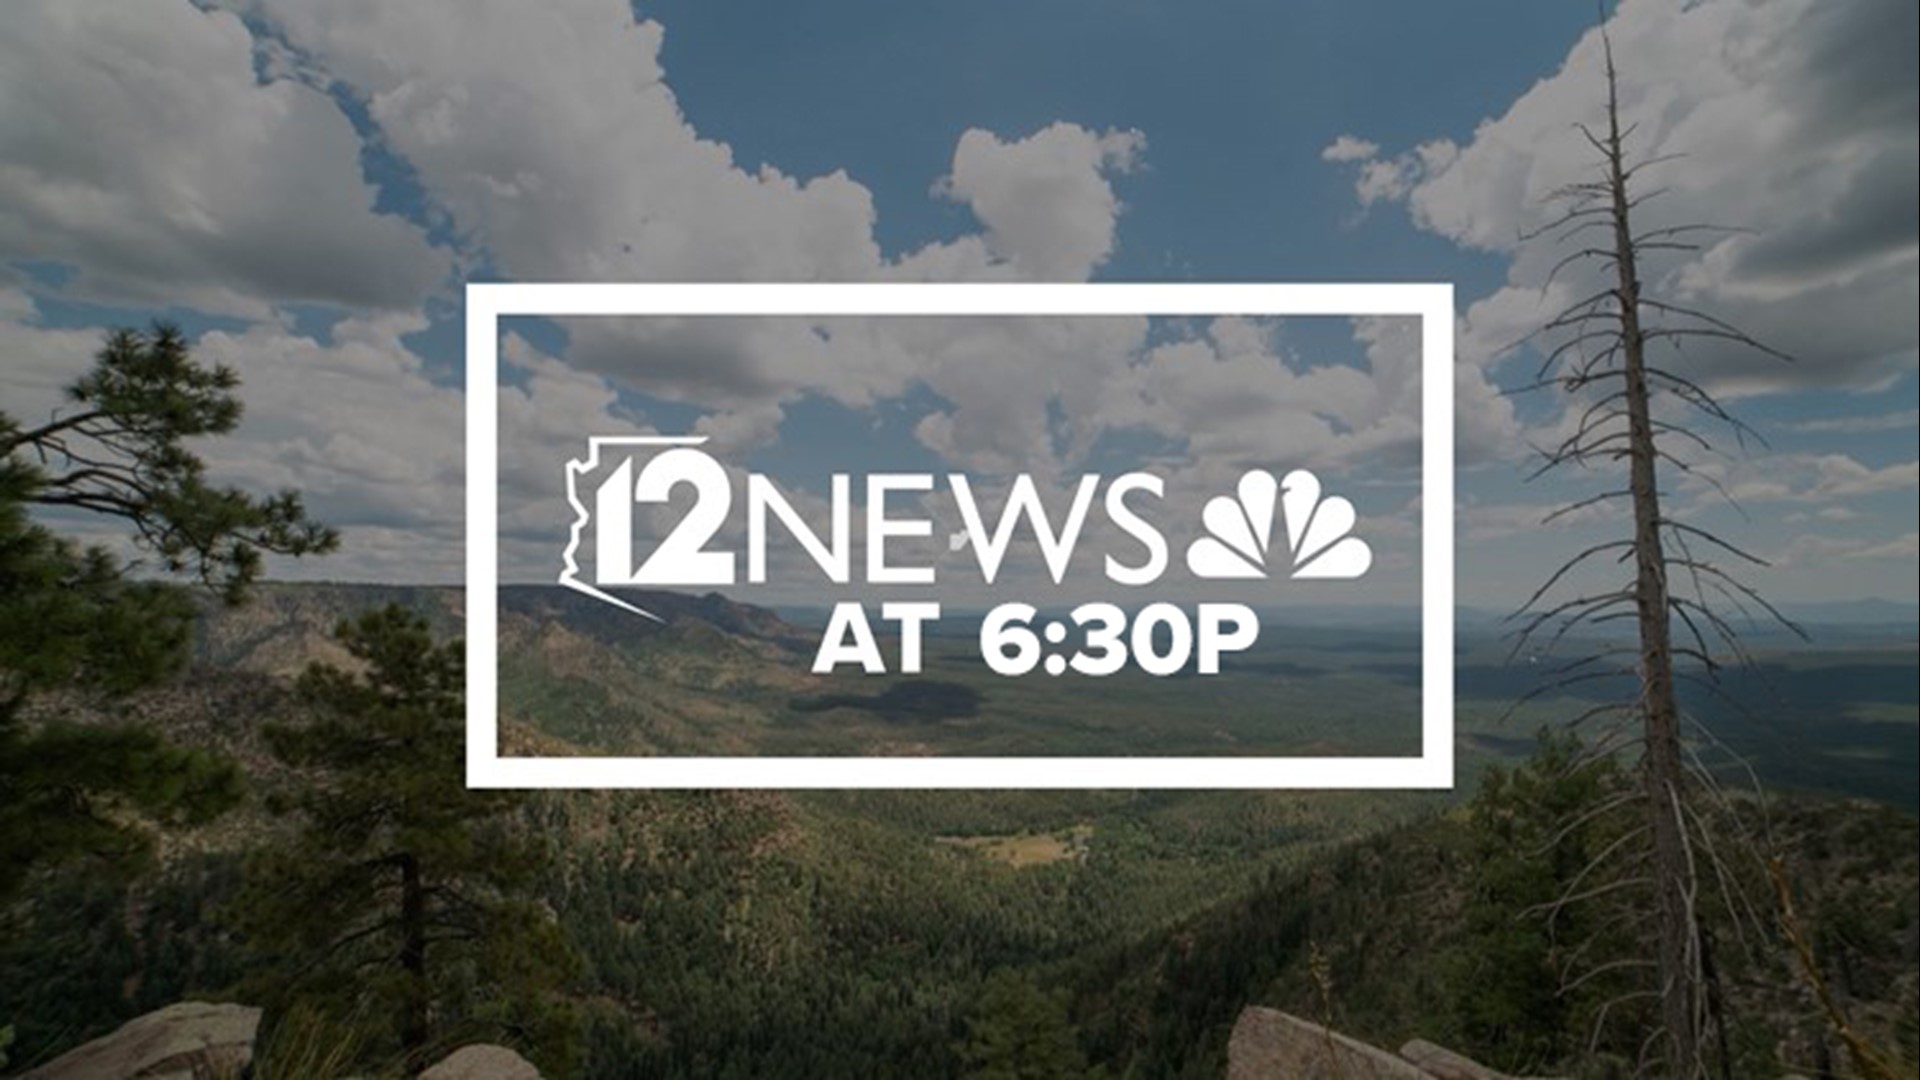 12 News at 6:30 delivers the day's news with insightful reporting, including the best political coverage in Arizona.